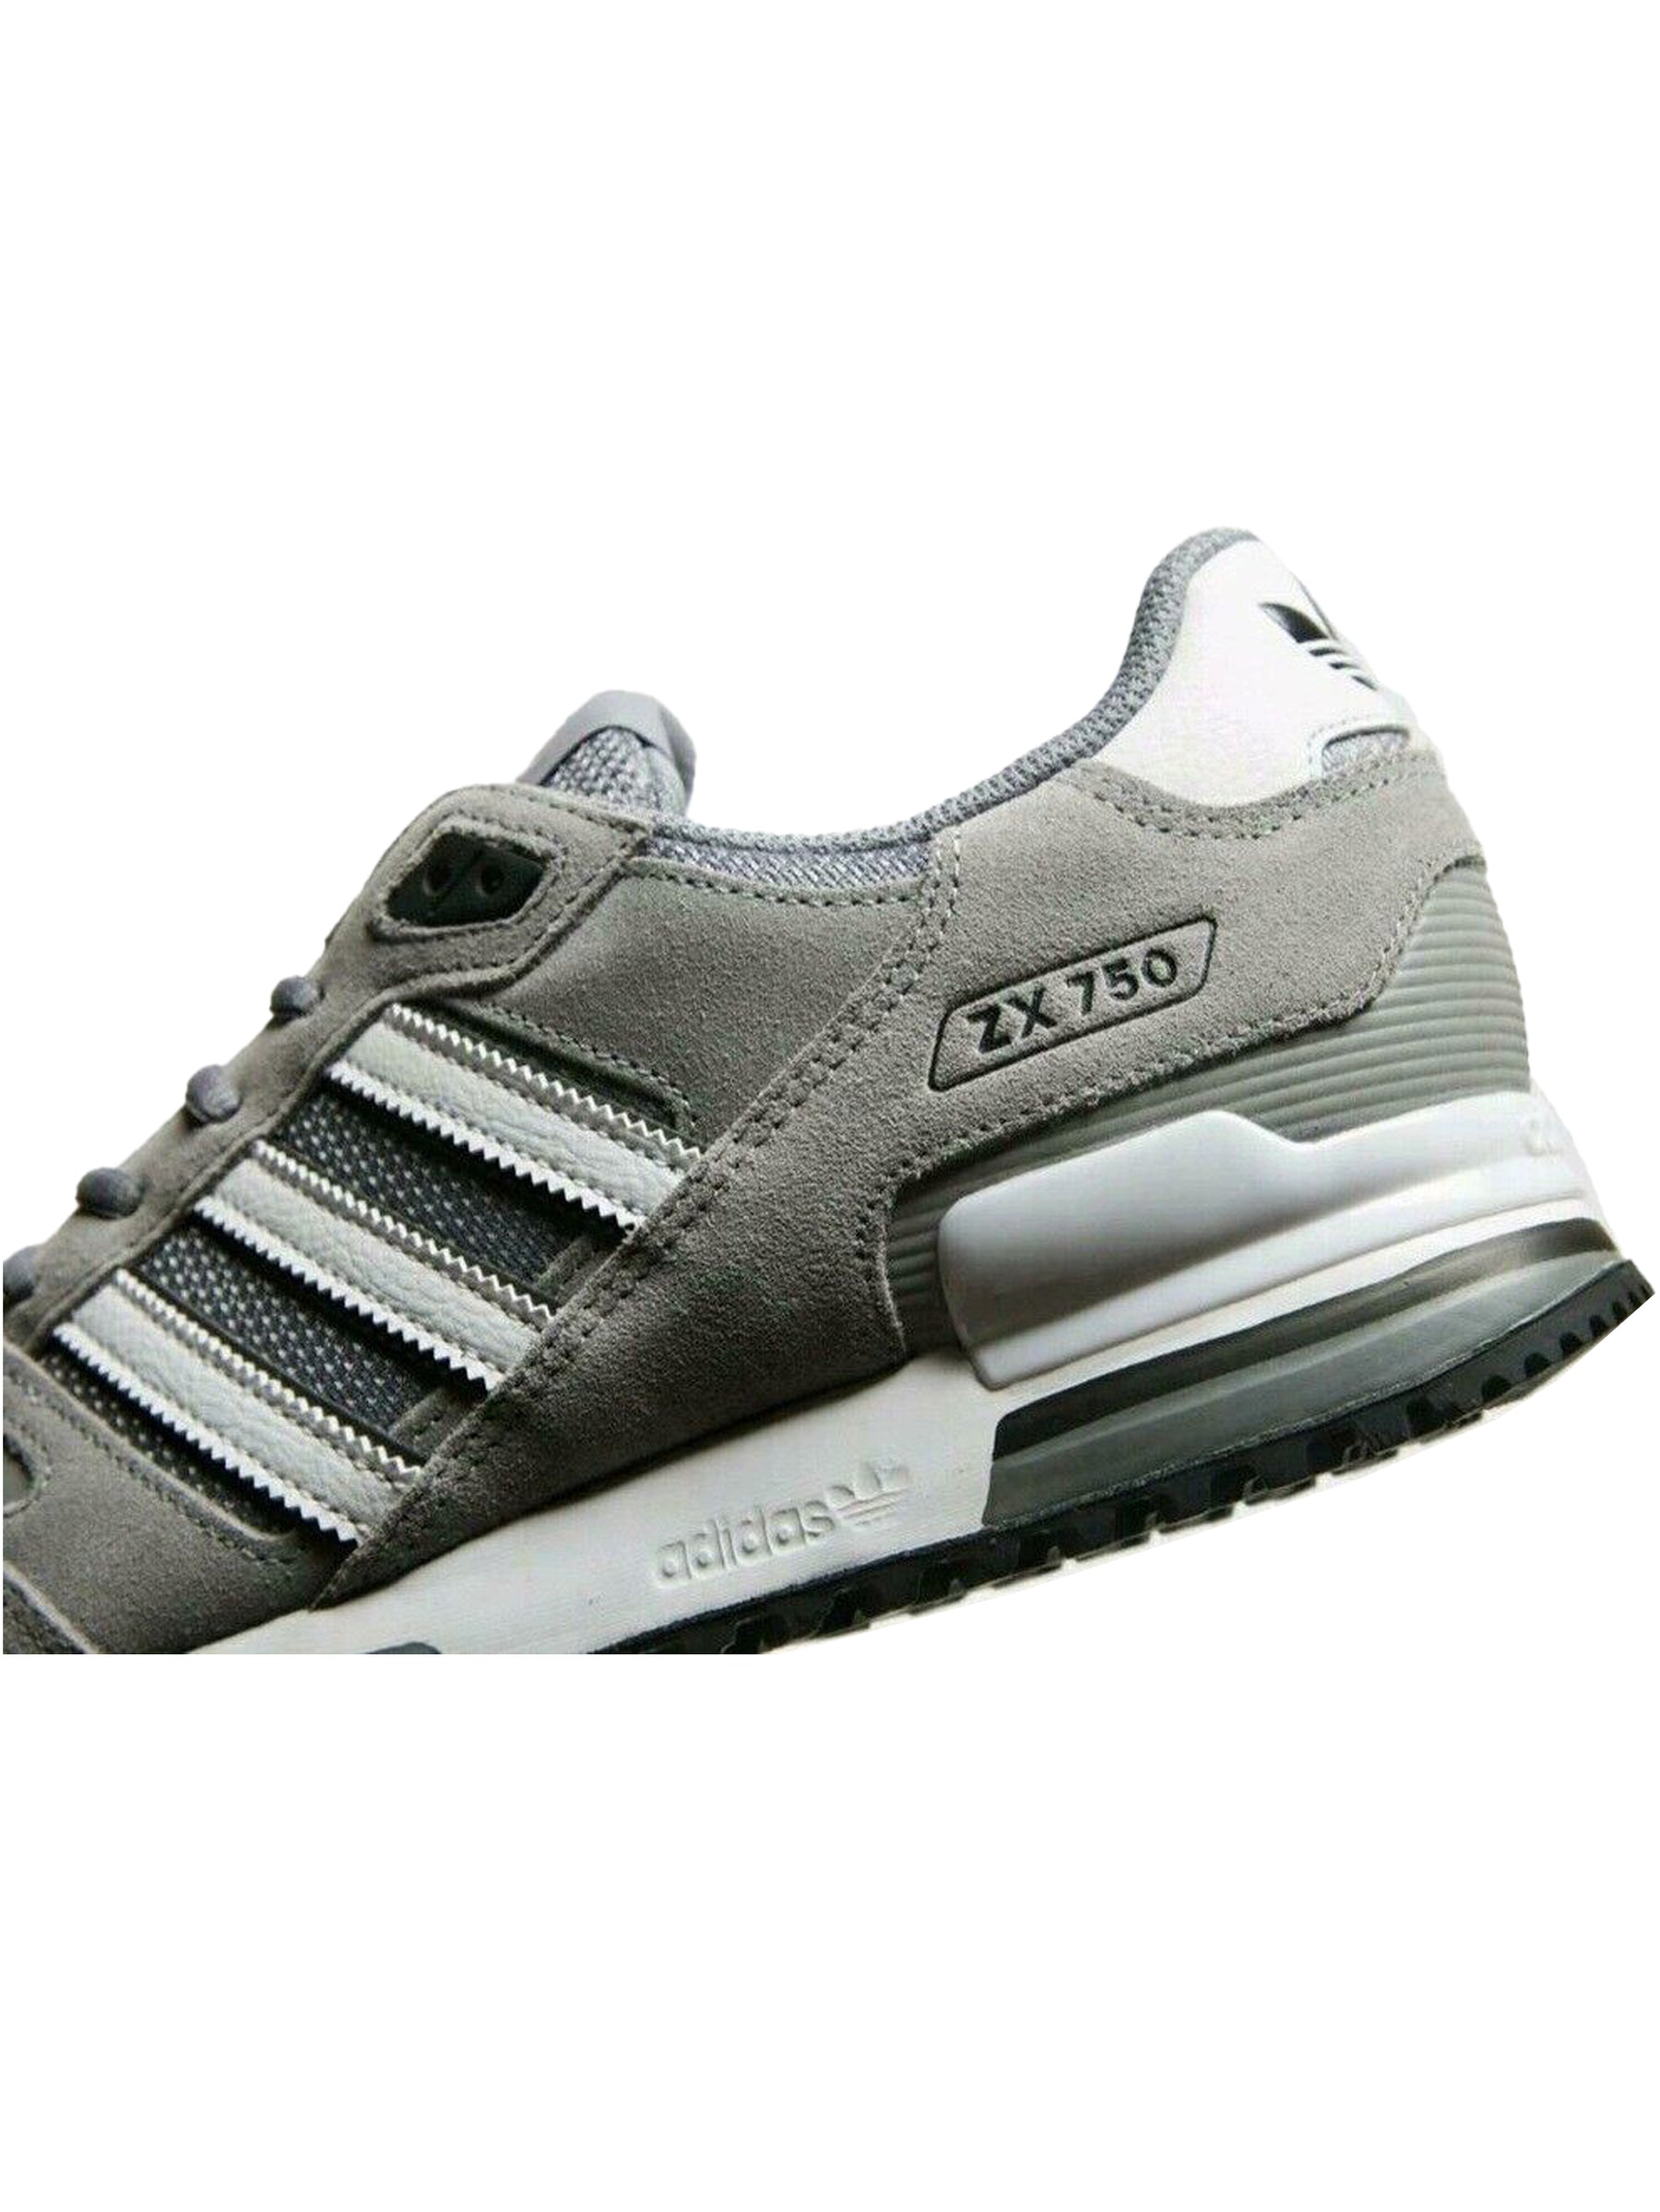 Adidas | Mens ZX 750 Trainers